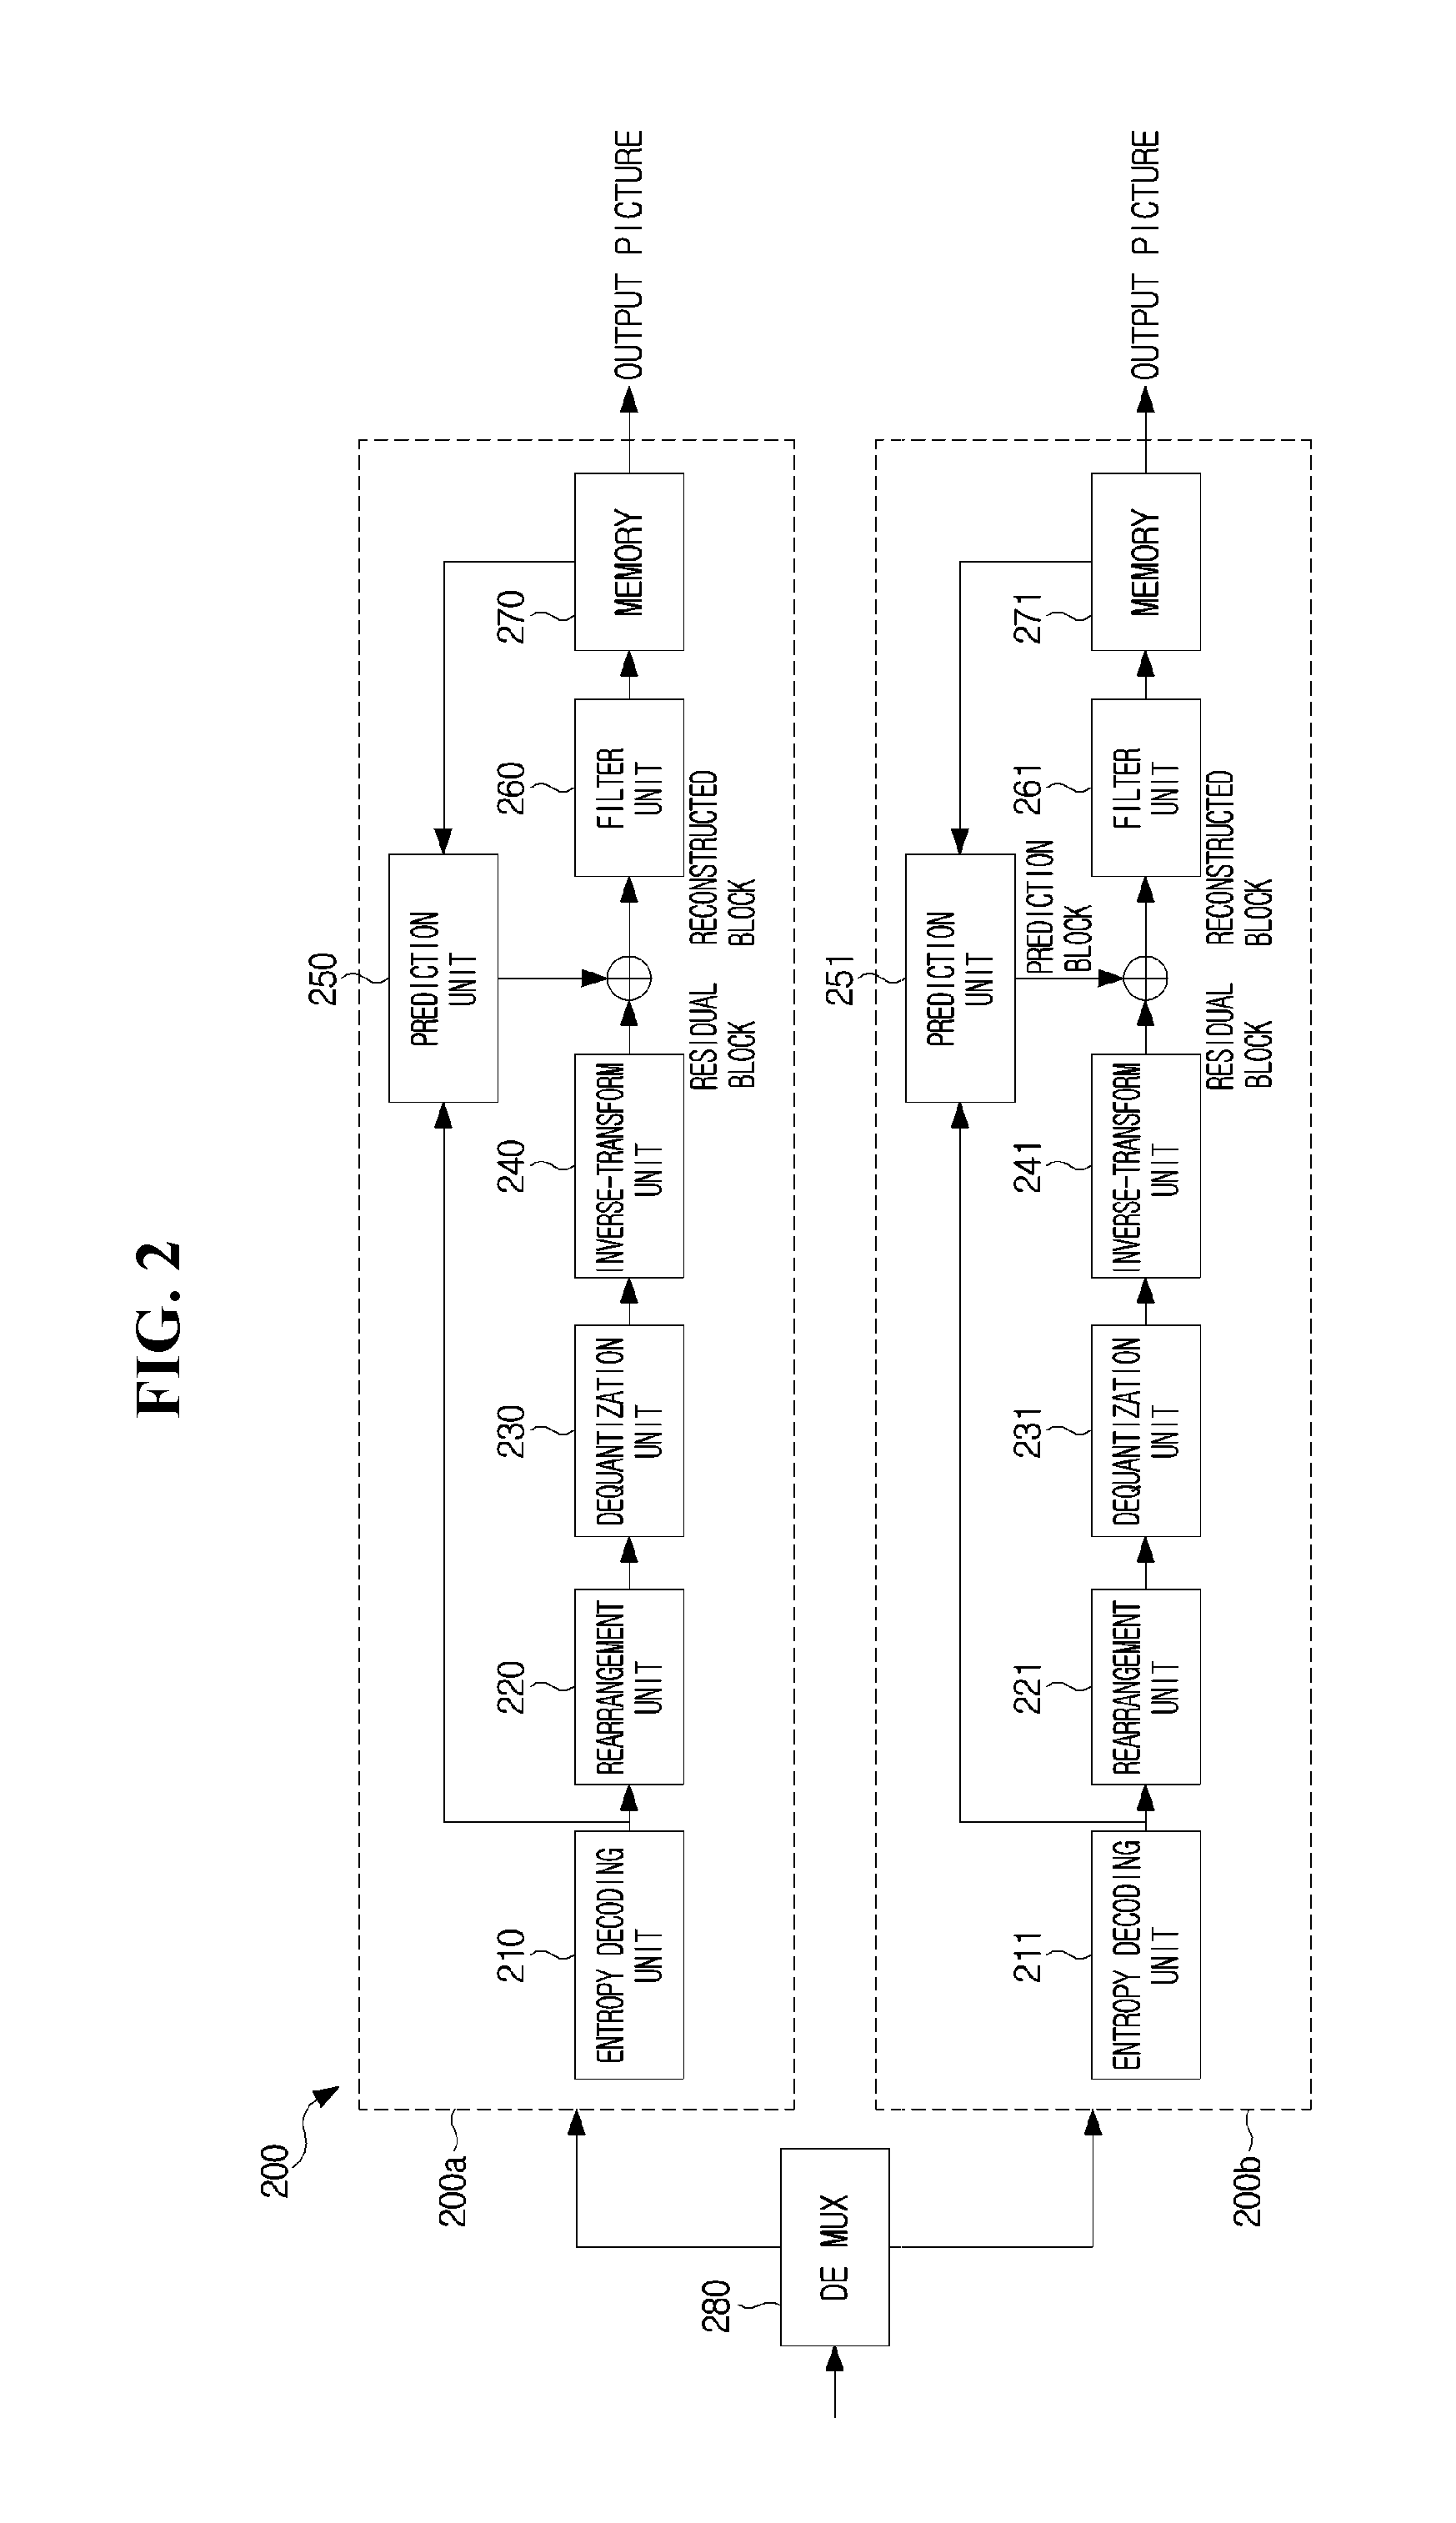 Scalable video signal encoding/decoding method and apparatus